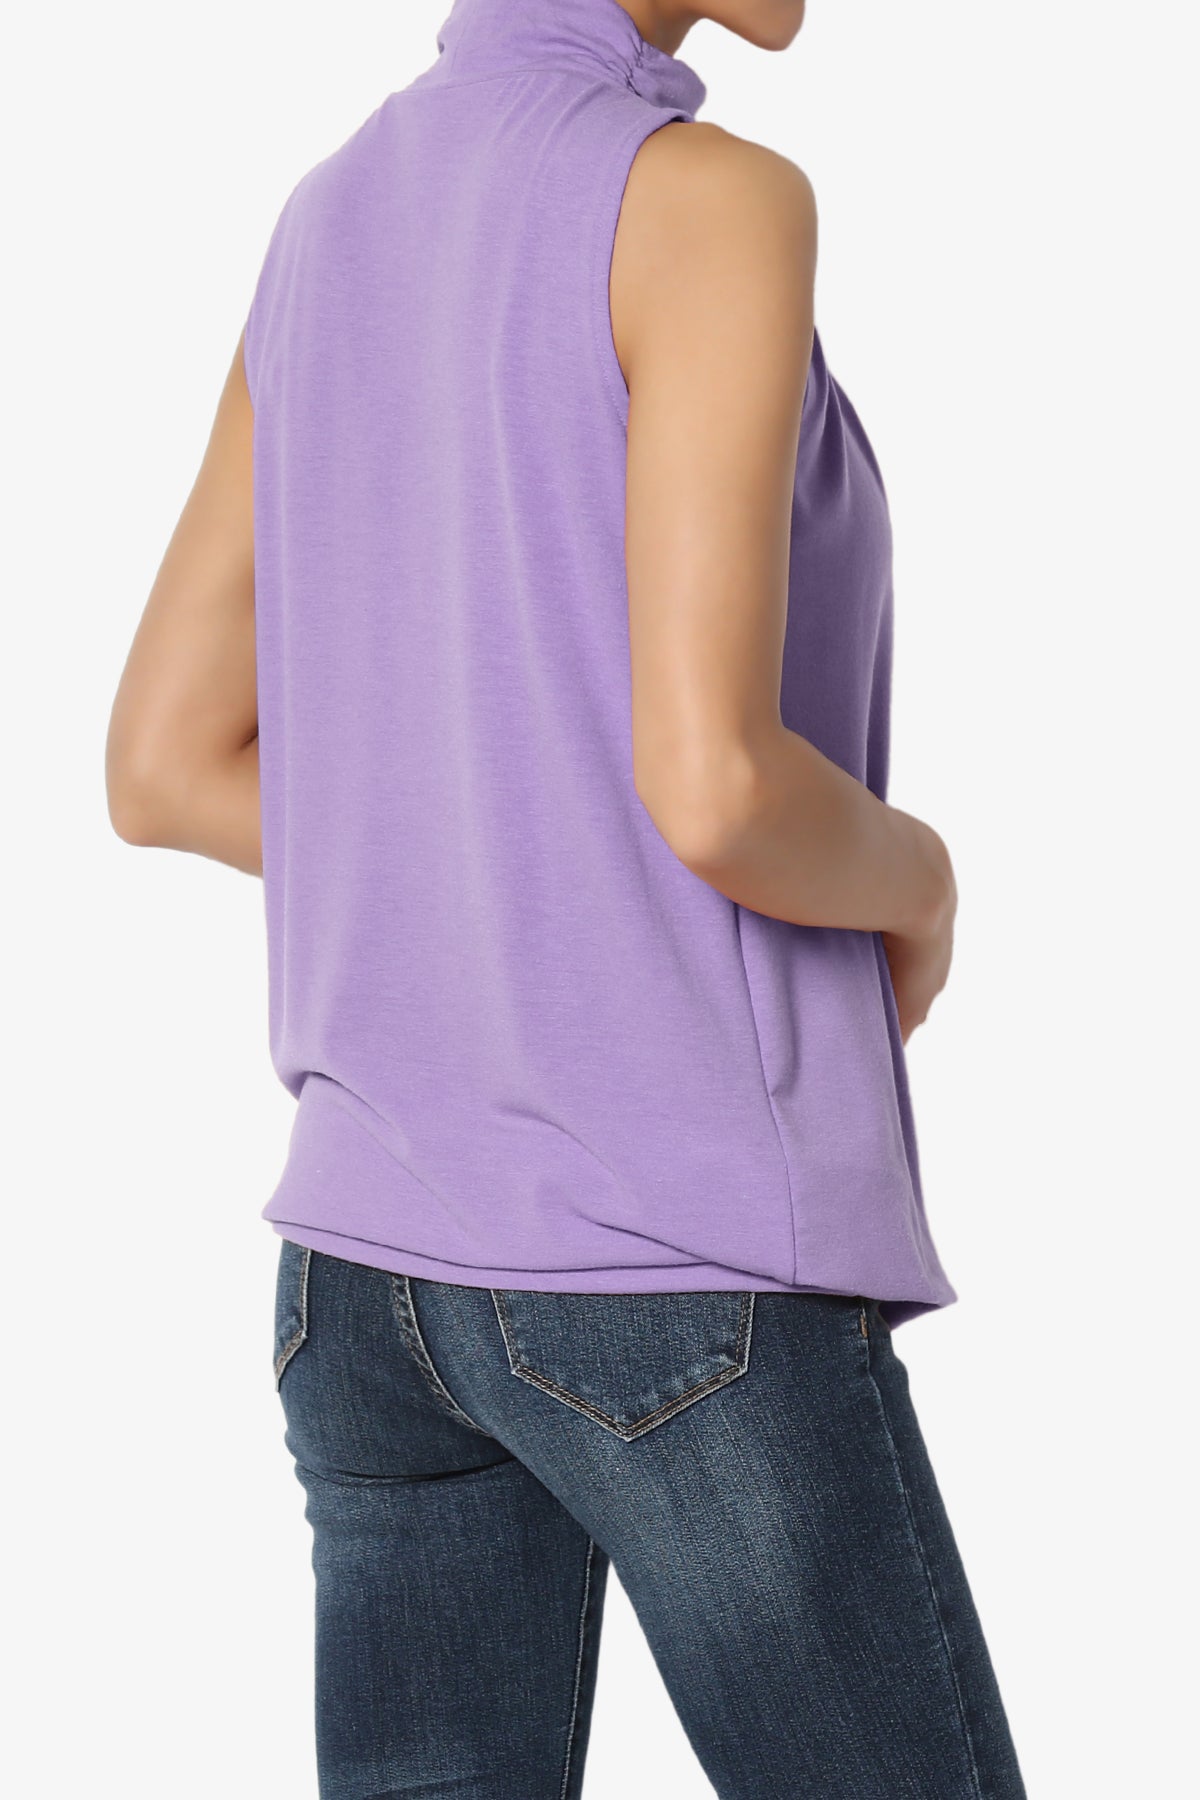 Load image into Gallery viewer, Jibbitz Sleeveless Mock Neck Pleated Top LAVENDER_4
